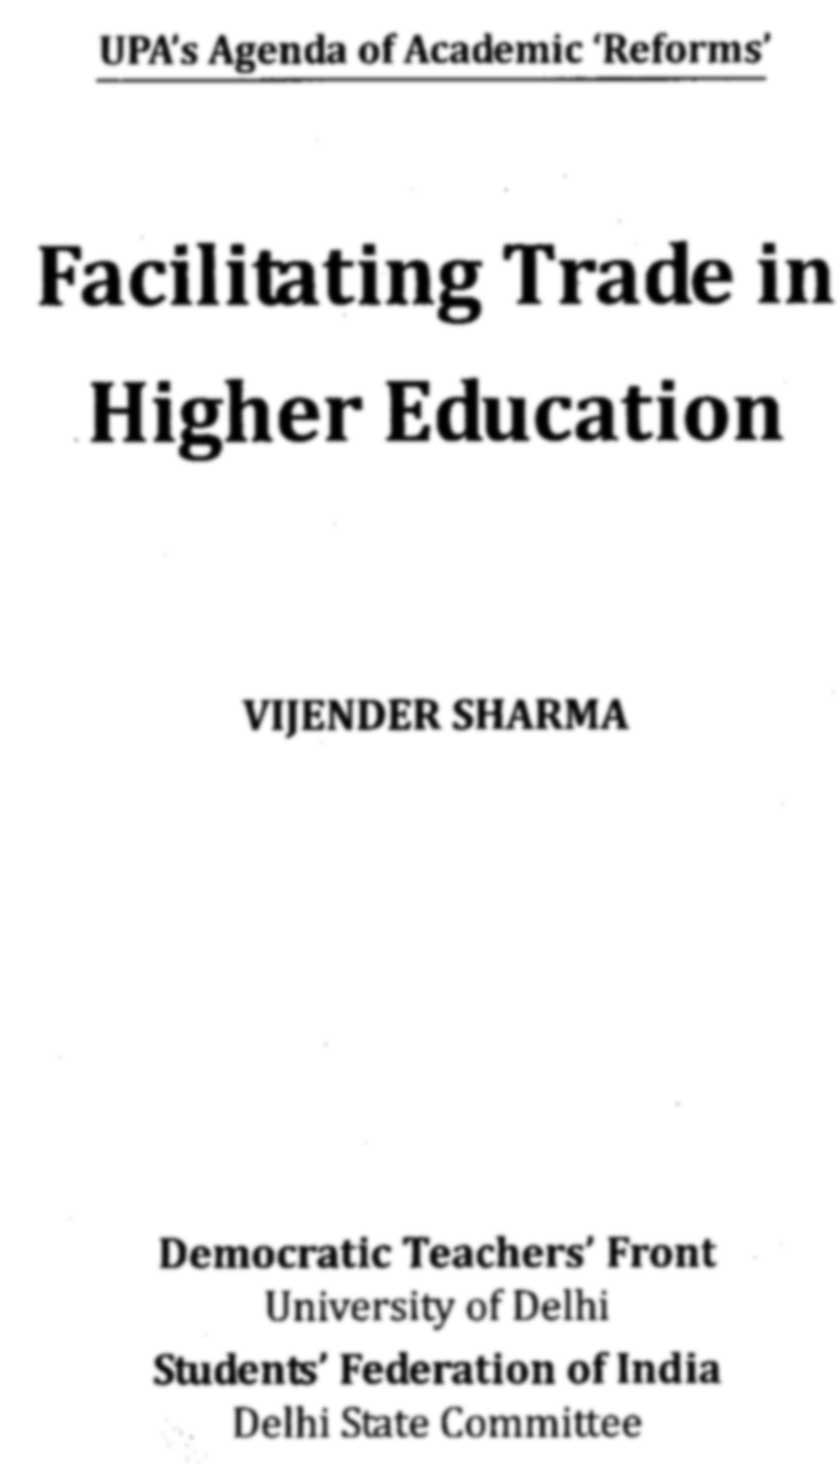 Research paper proposal on privatization of education